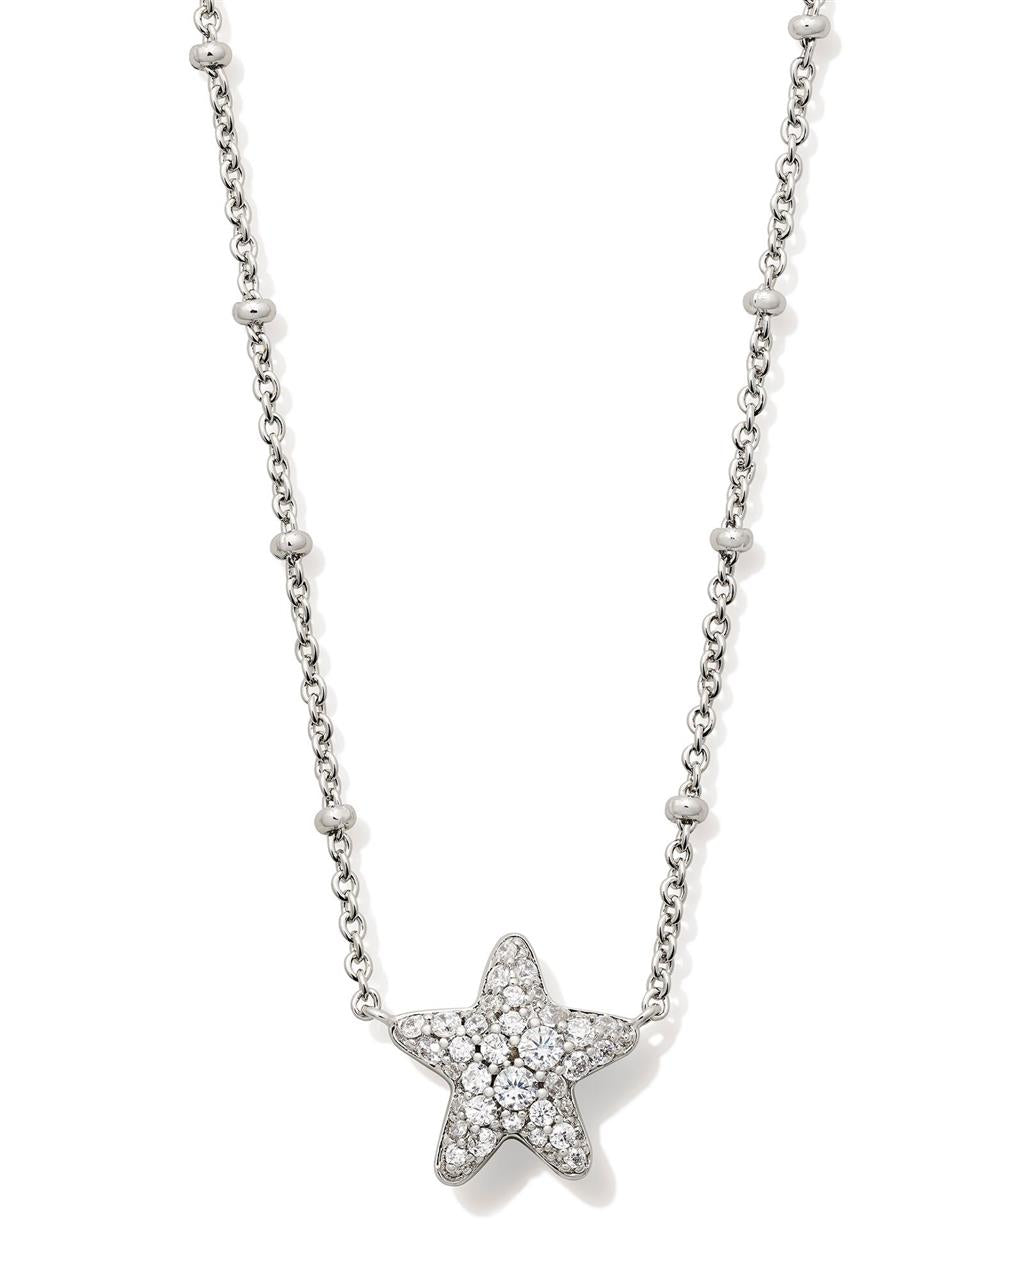 JAE STAR PAVE SHORT PENDANT NECKLACE SILVER WHITE CRYSTAL